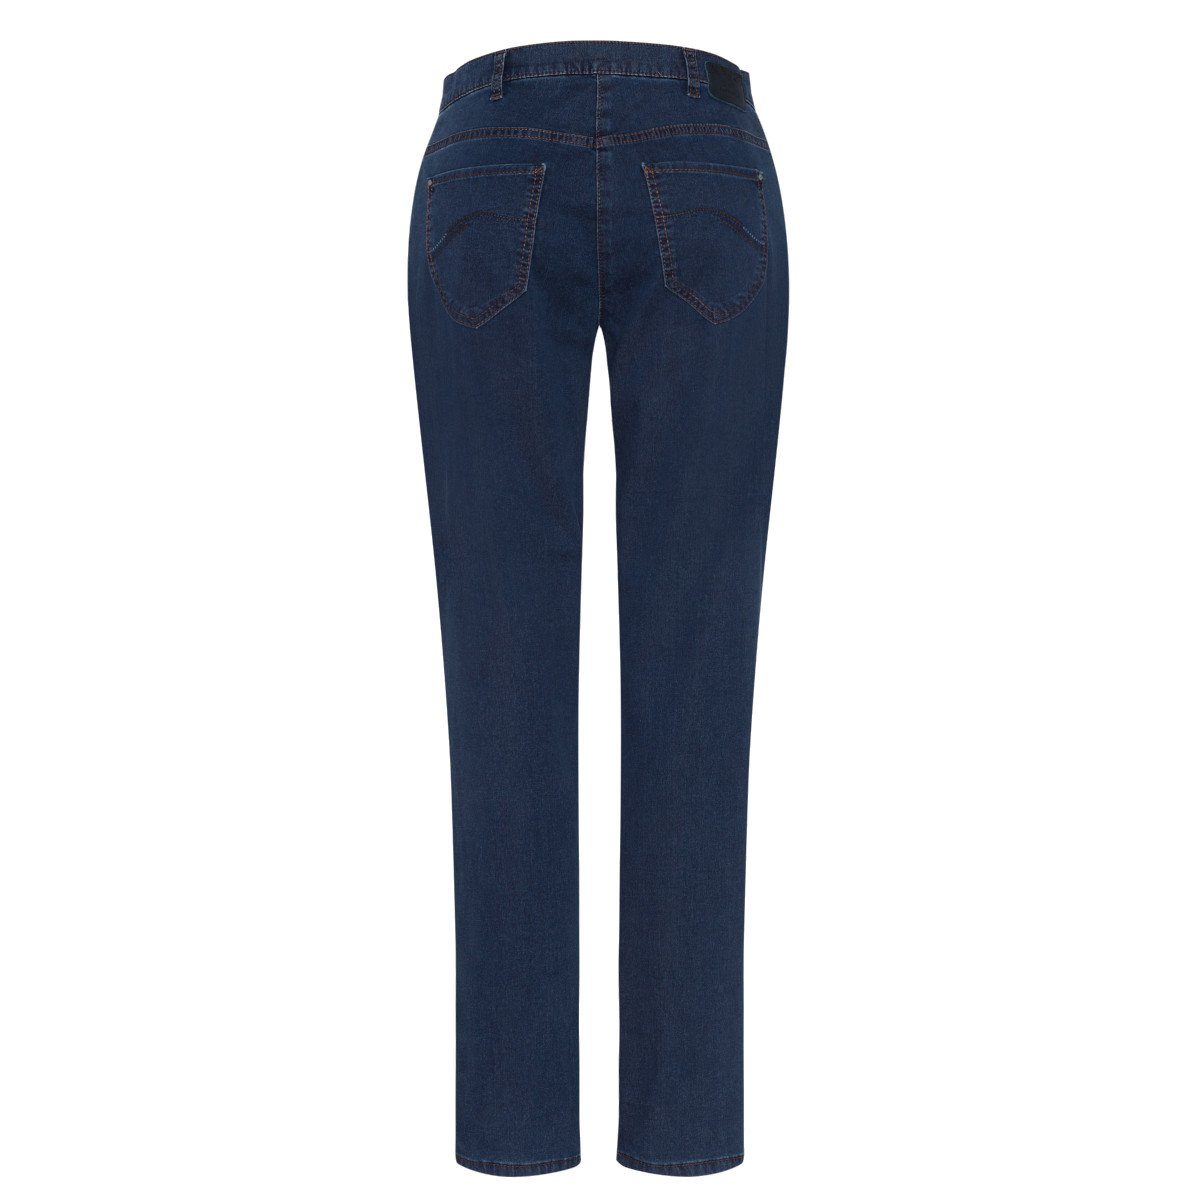 stoned Plus 5-Pocket-Jeans by BRAX (25) Fay Corry RAPHAELA Comfort FIT COMFORT